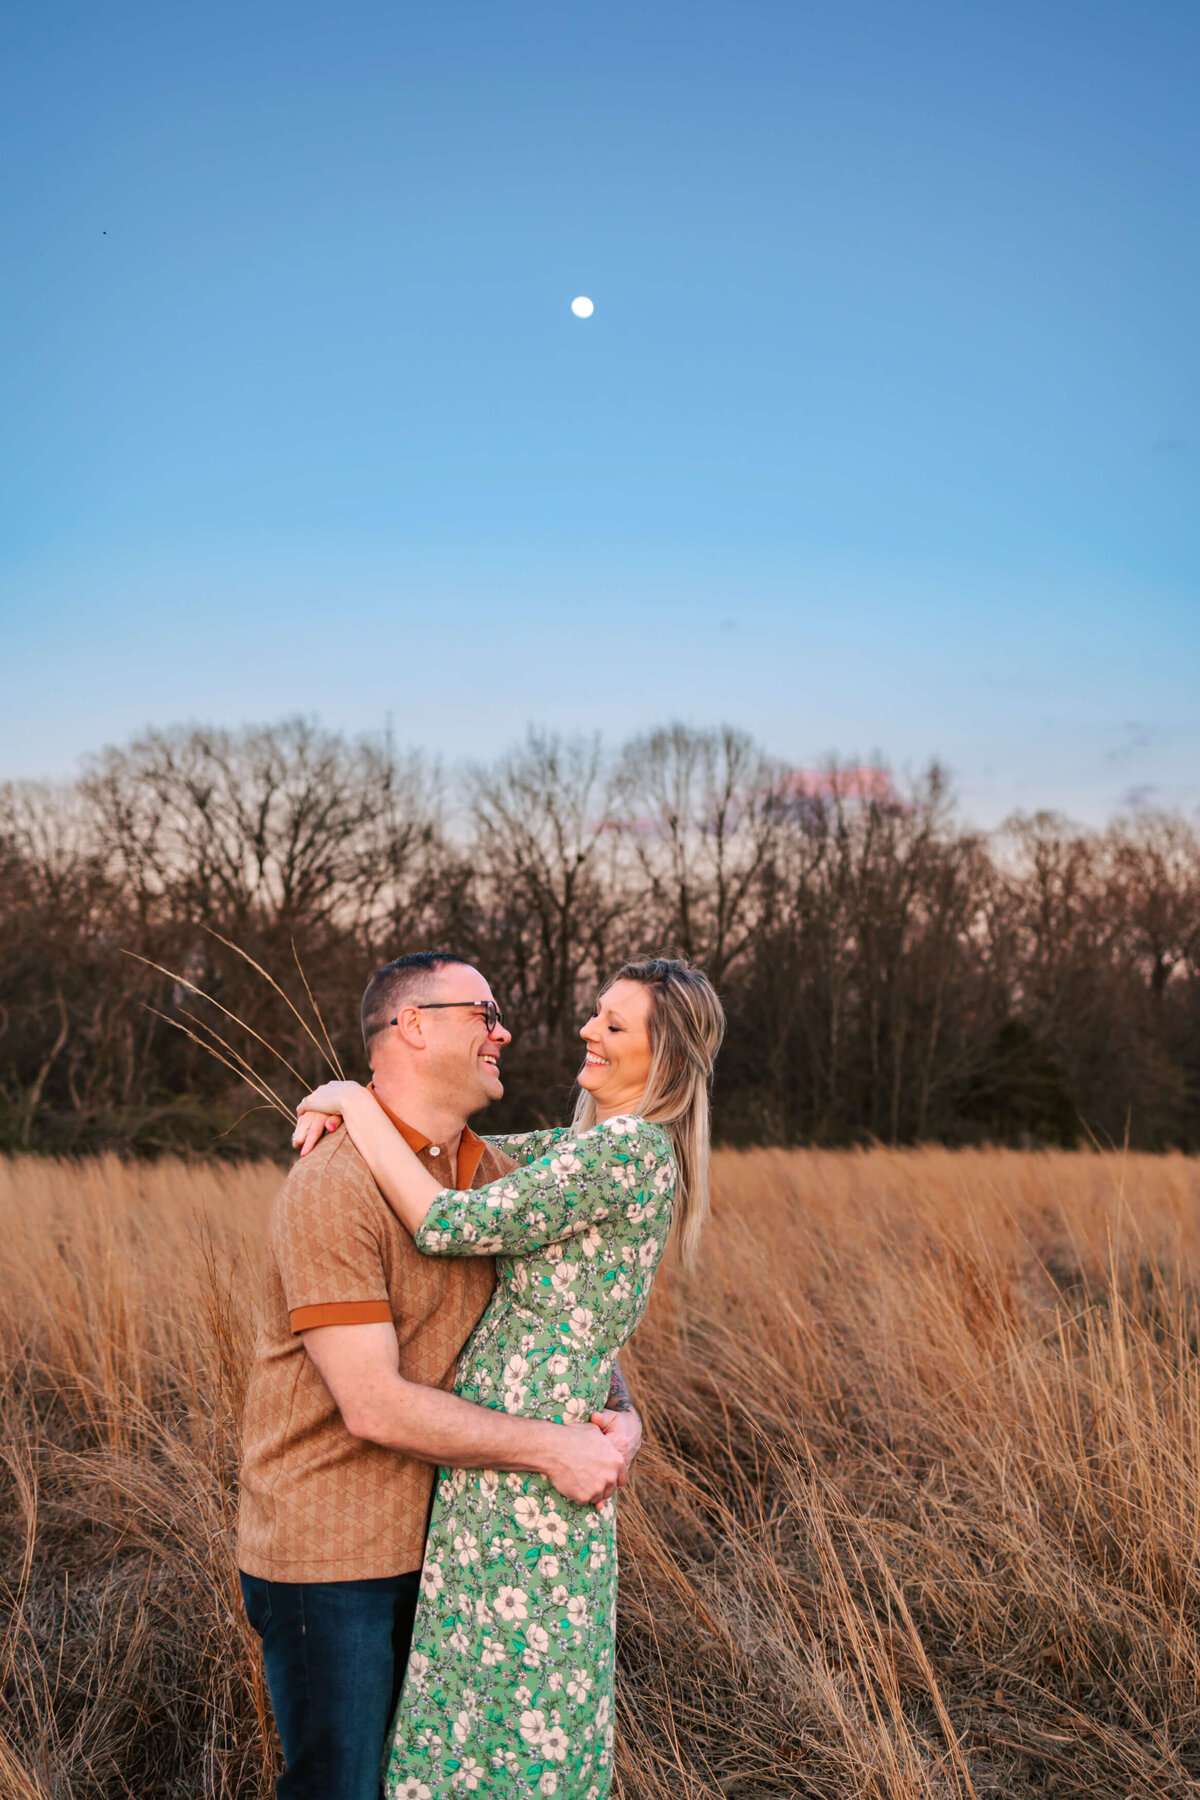 A man and woman are standing together in a field of tall grass  with their arms around each other smiling at each other and laughing. The moon is showing in the blue sky